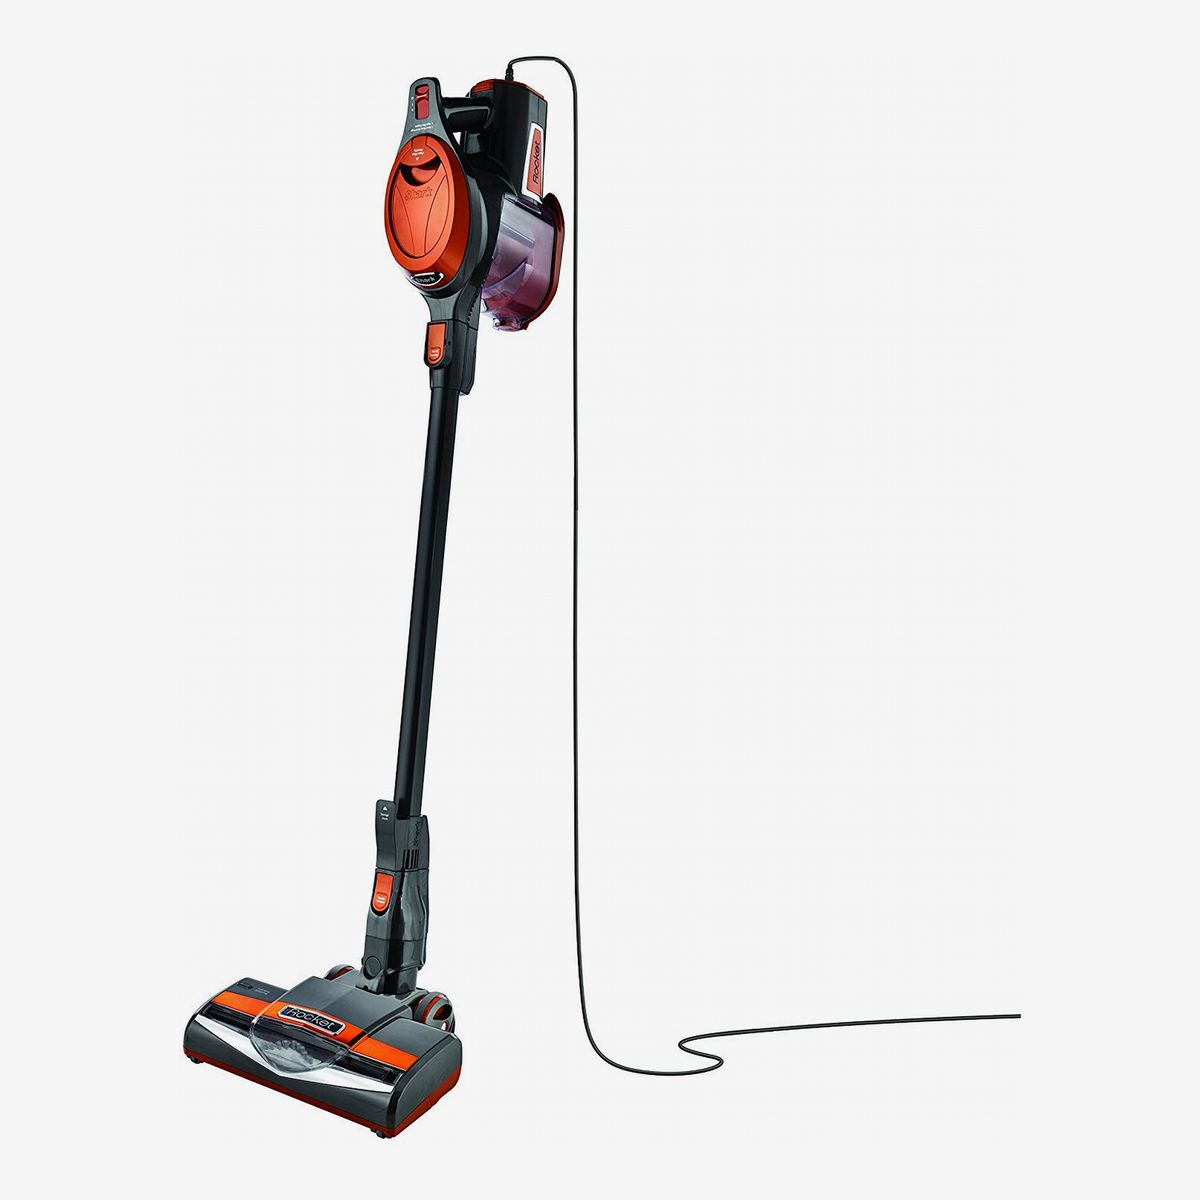 18 Best Vacuums For Pet Hair 2021 The, Best Vacuum For Hardwood Floors And Pets